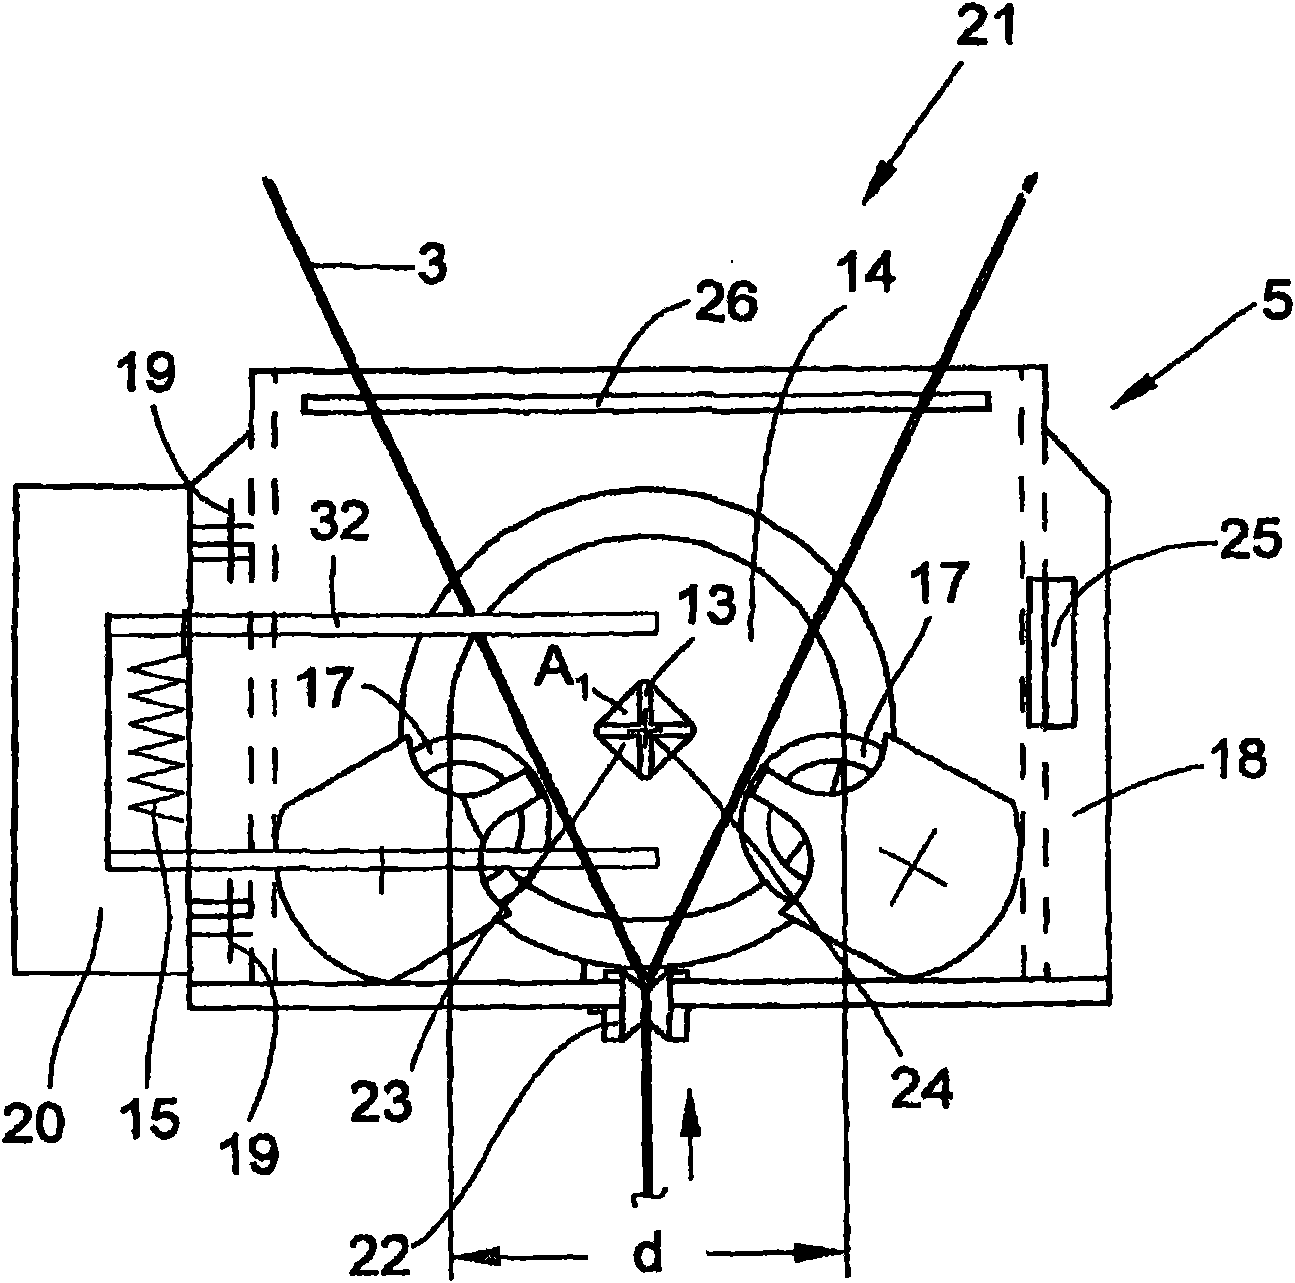 Paraffin-treatment device for a workstation on a textile machine producing cross-wound bobbins